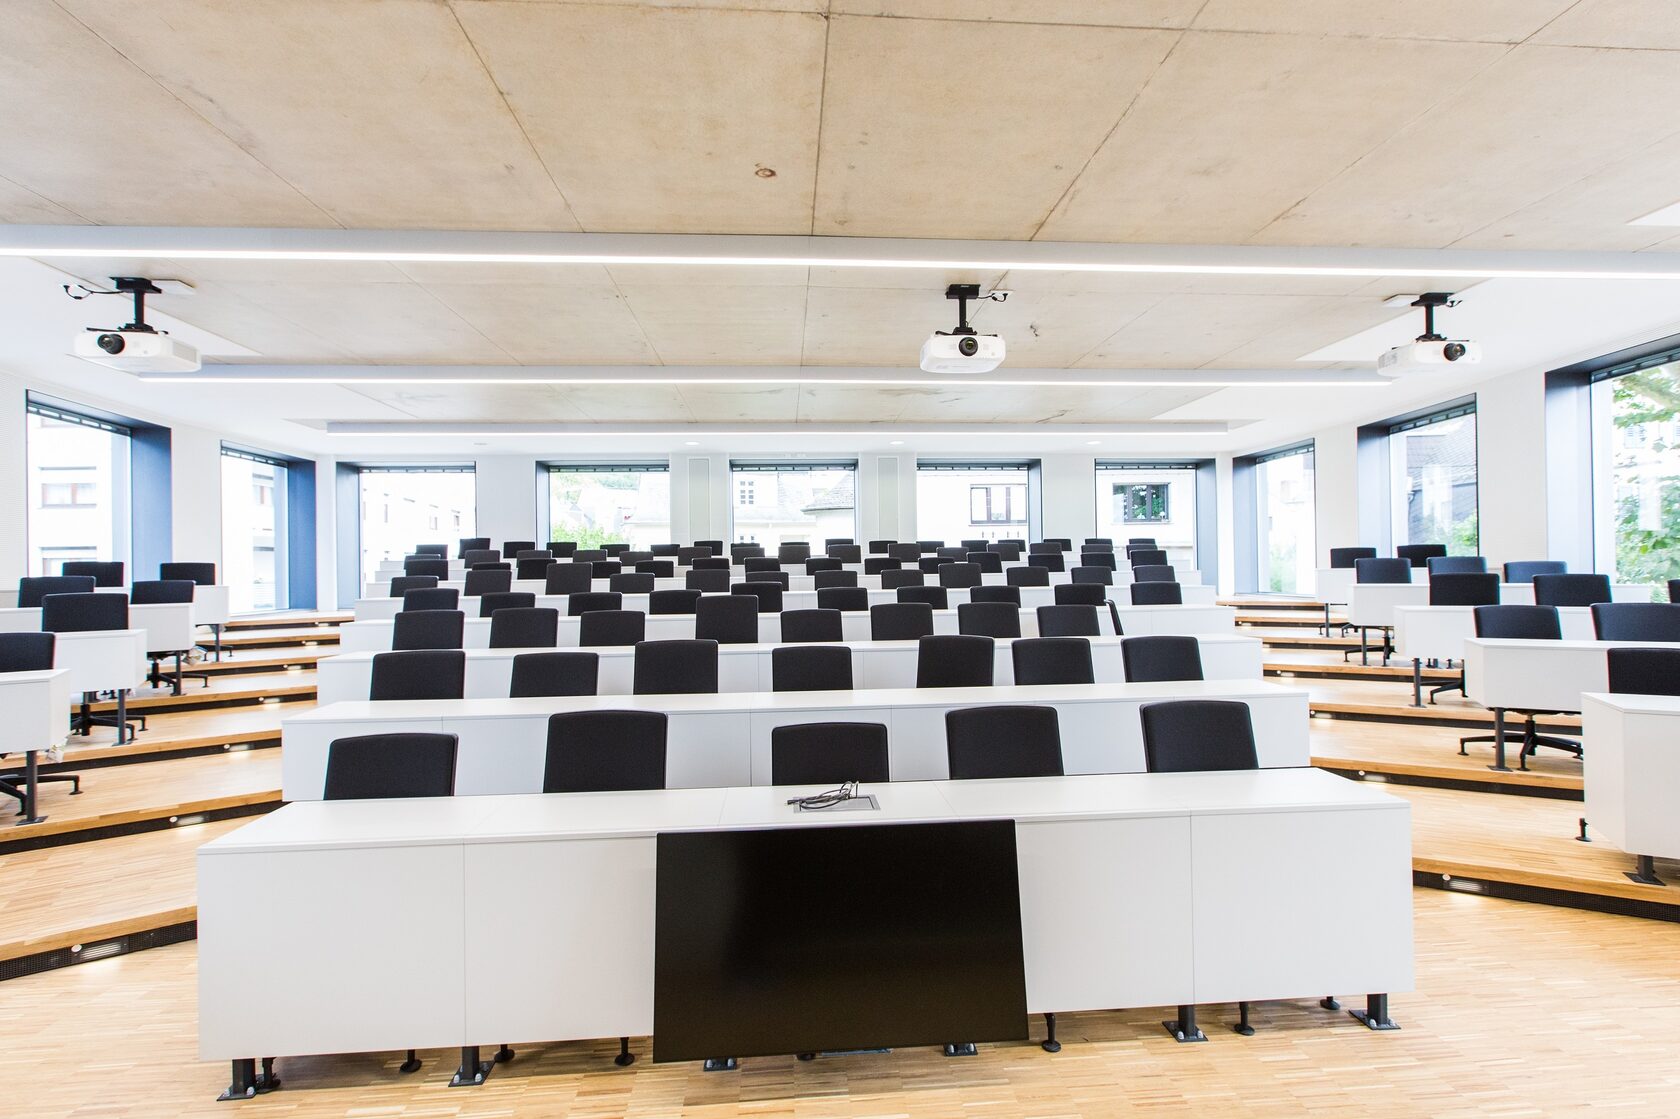 Main lecture hall with WHU